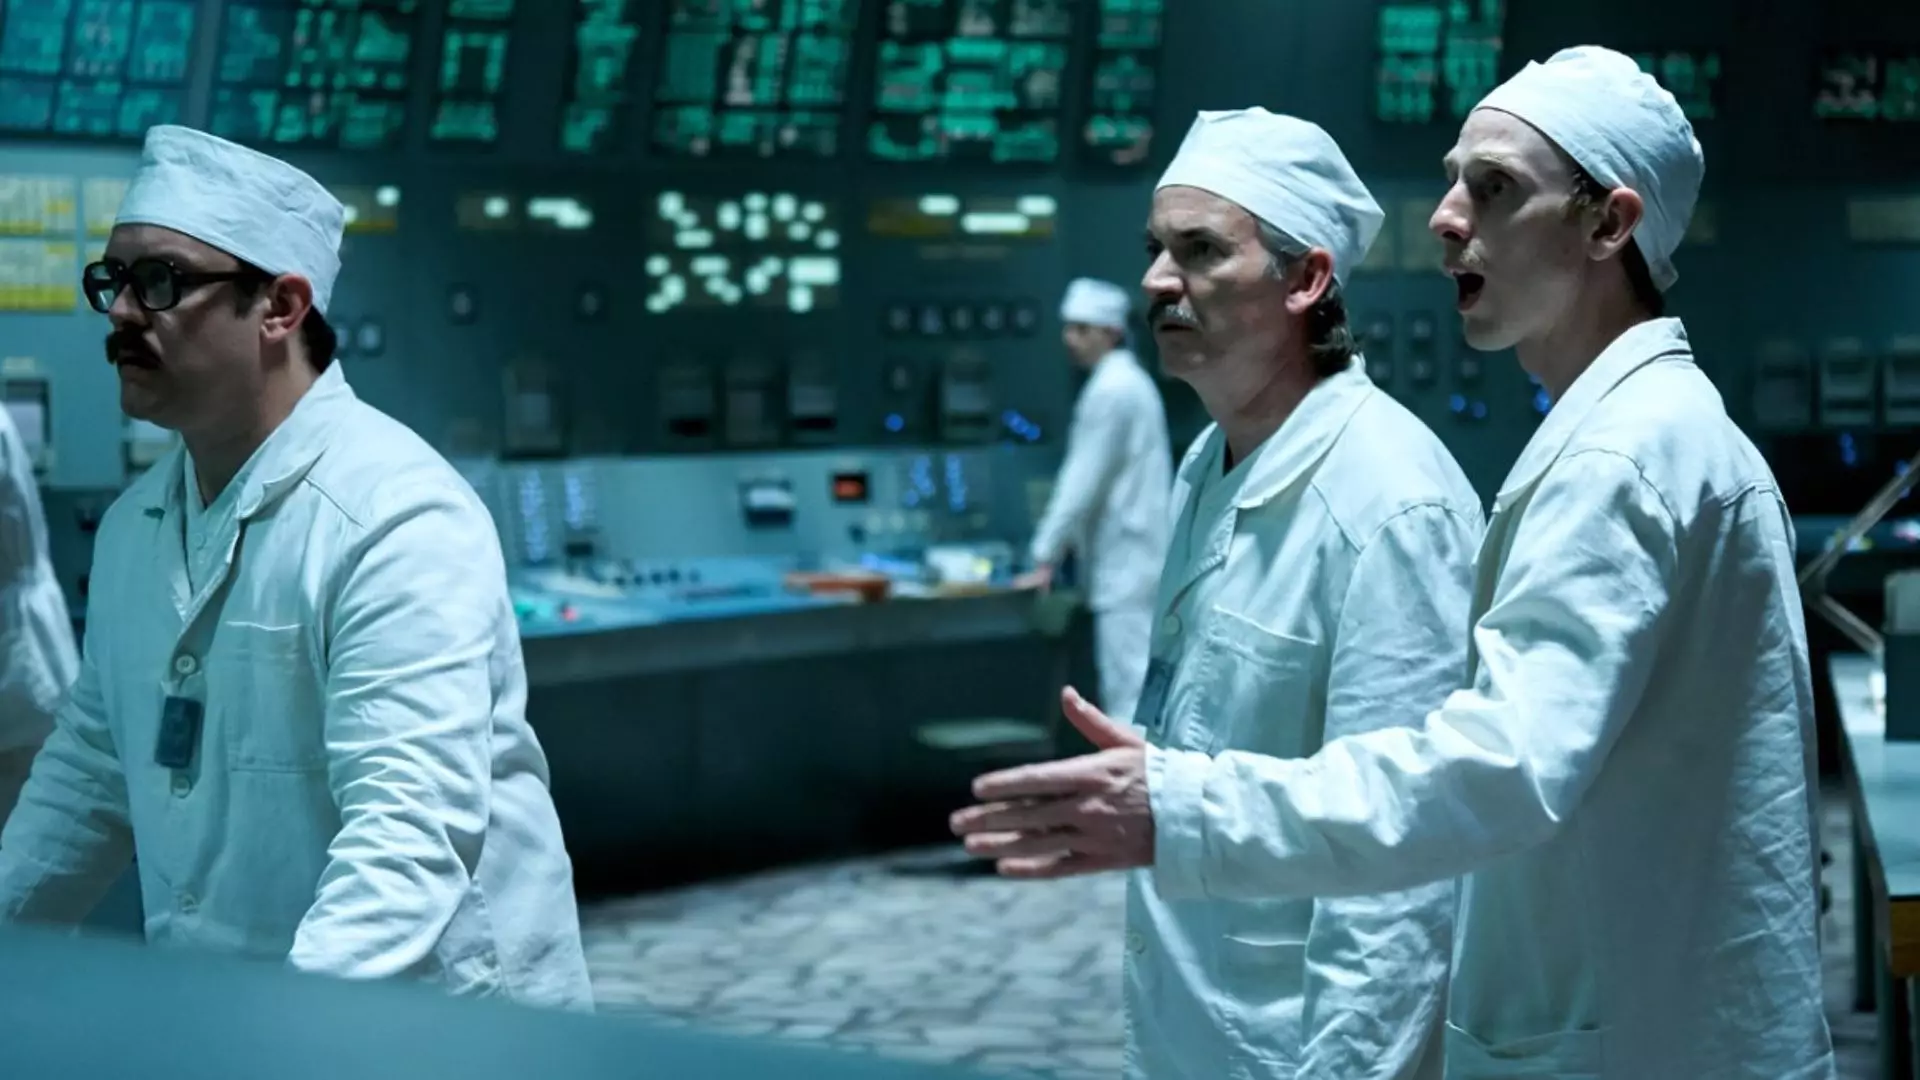 'Chernobyl' Creator On The Meaning Behind That Powerful Final Scene